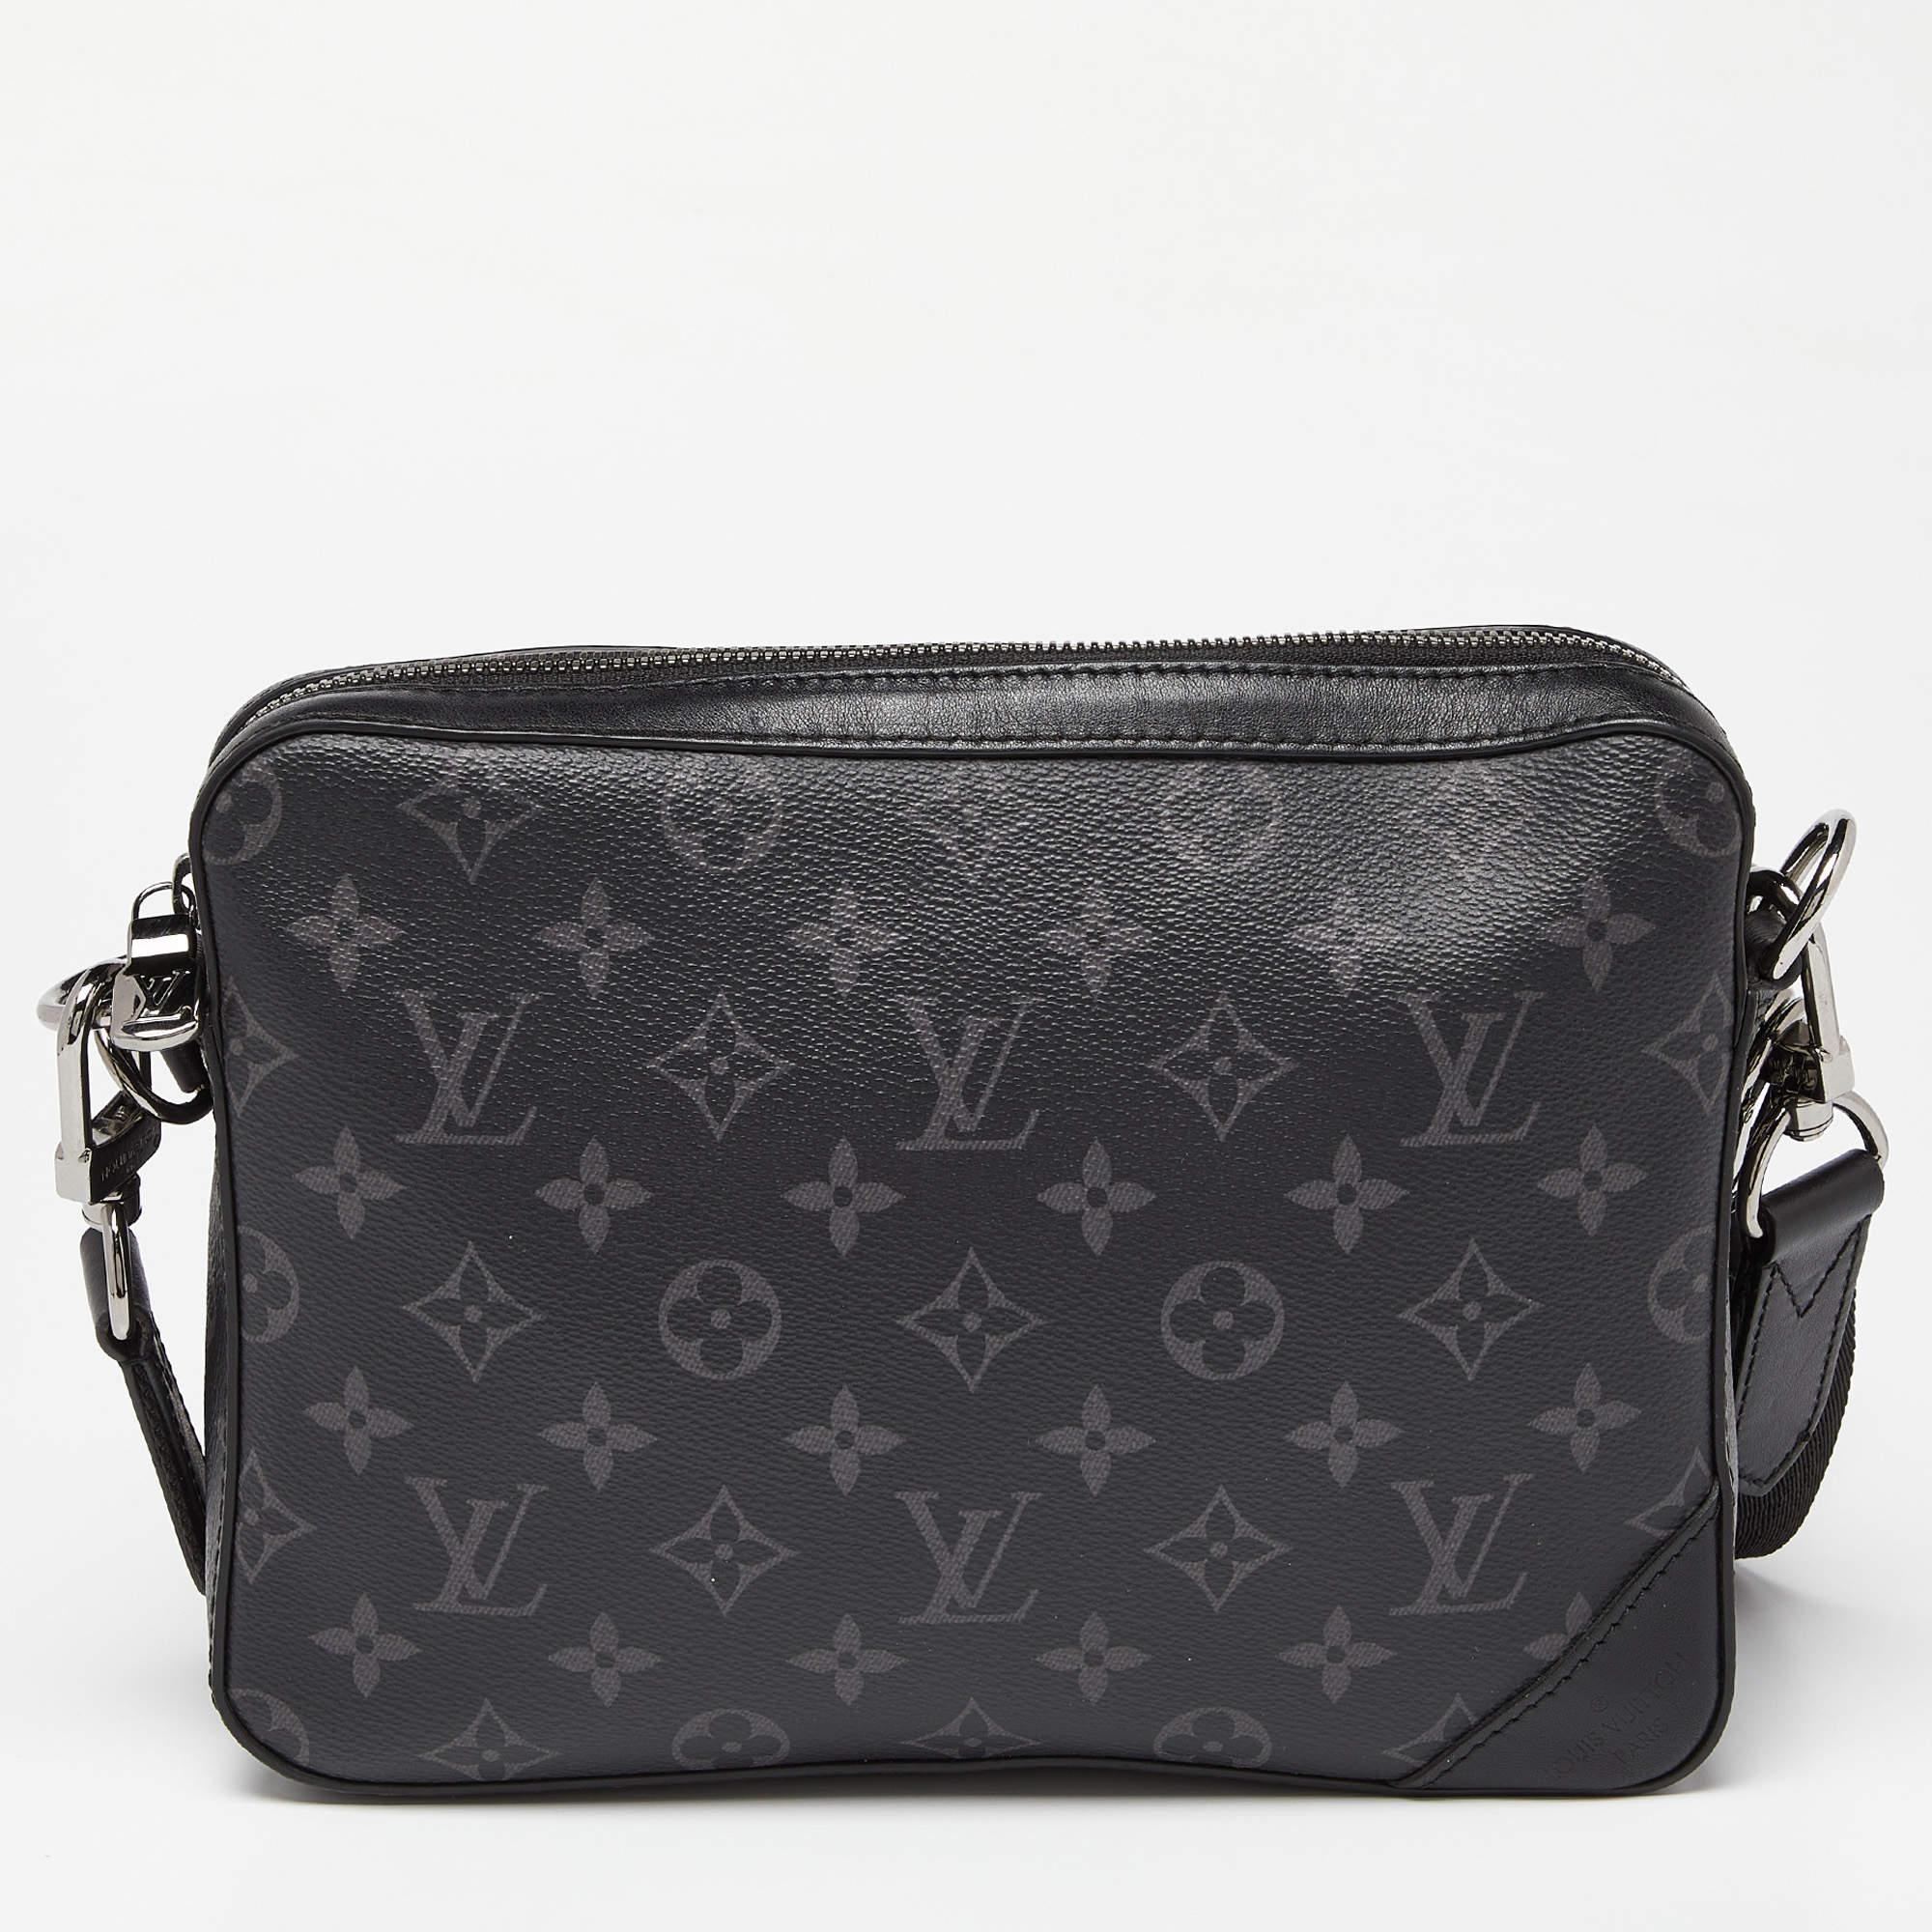 Get style and carry your essentials with ease using this messenger bag by Louis Vuitton. It has been crafted from Monogram Eclipse Canvas and has zip-enclosed compartments.

Includes: Original Dustbag, Original Box

